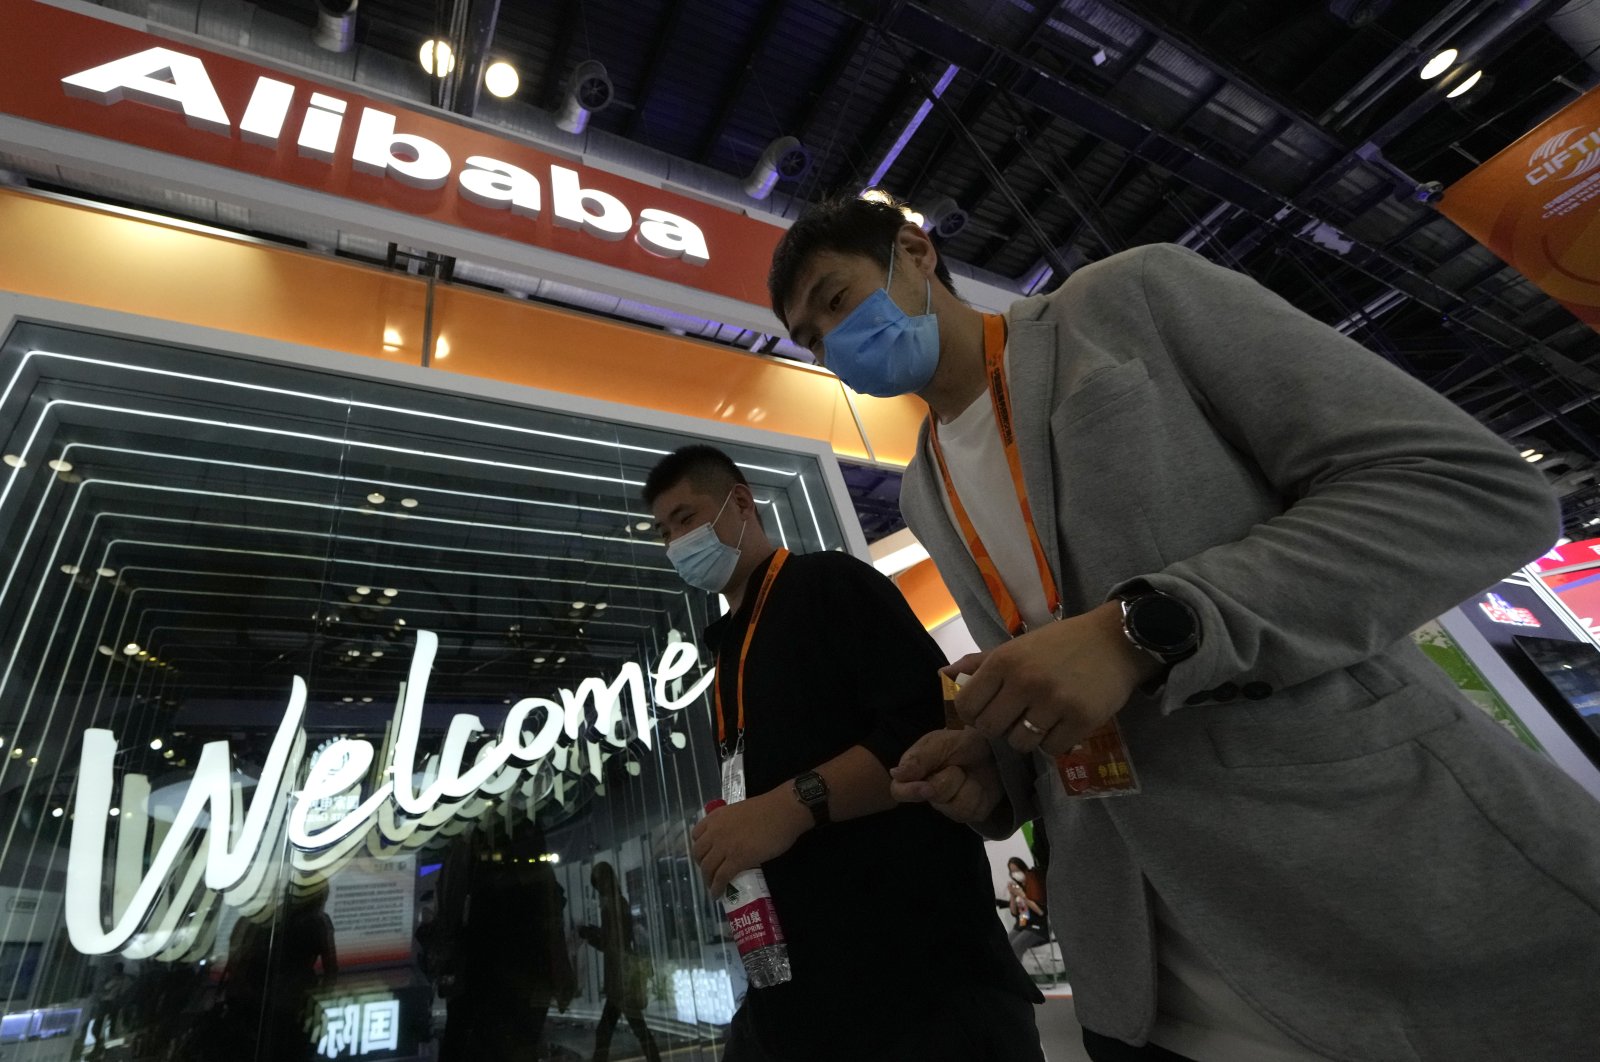 Visitors pass by the Alibaba booth during the China International Fair for Trade in Services (CIFTIS) in Beijing, China, Sept. 7, 2021. (AP Photo)